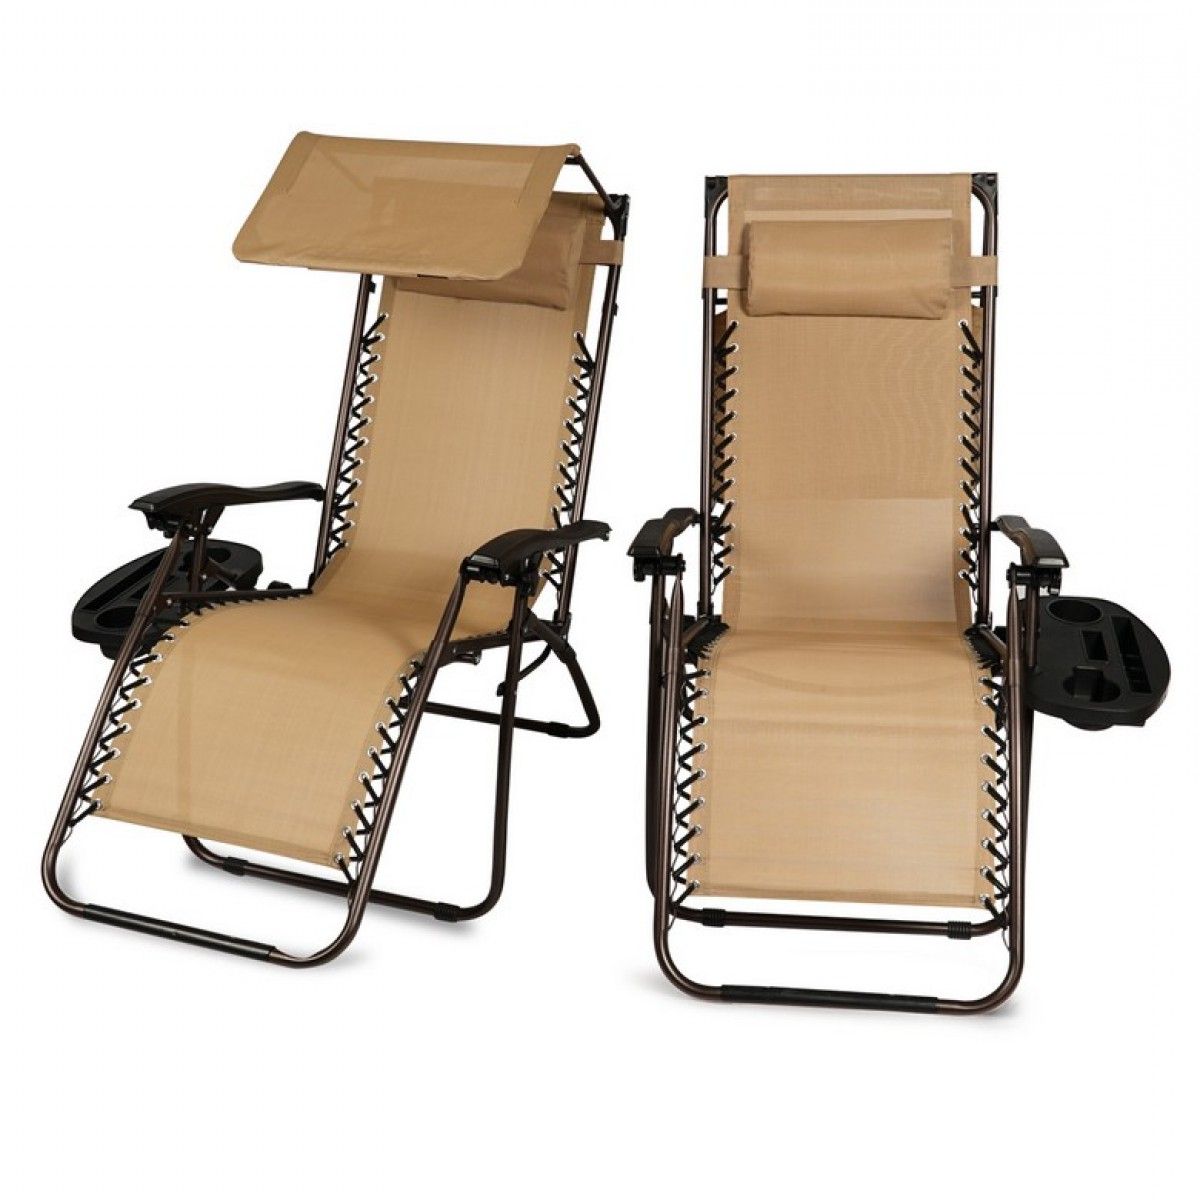 Garden Oversized Chairs With Sunshade And Drink Tray Inside Current Belleze 2 Pack Zero Gravity Chair W/ Canopy Top Reclining Lounge Chairs  Outdoor Patio W/ Cup Holder, Tan (View 11 of 25)